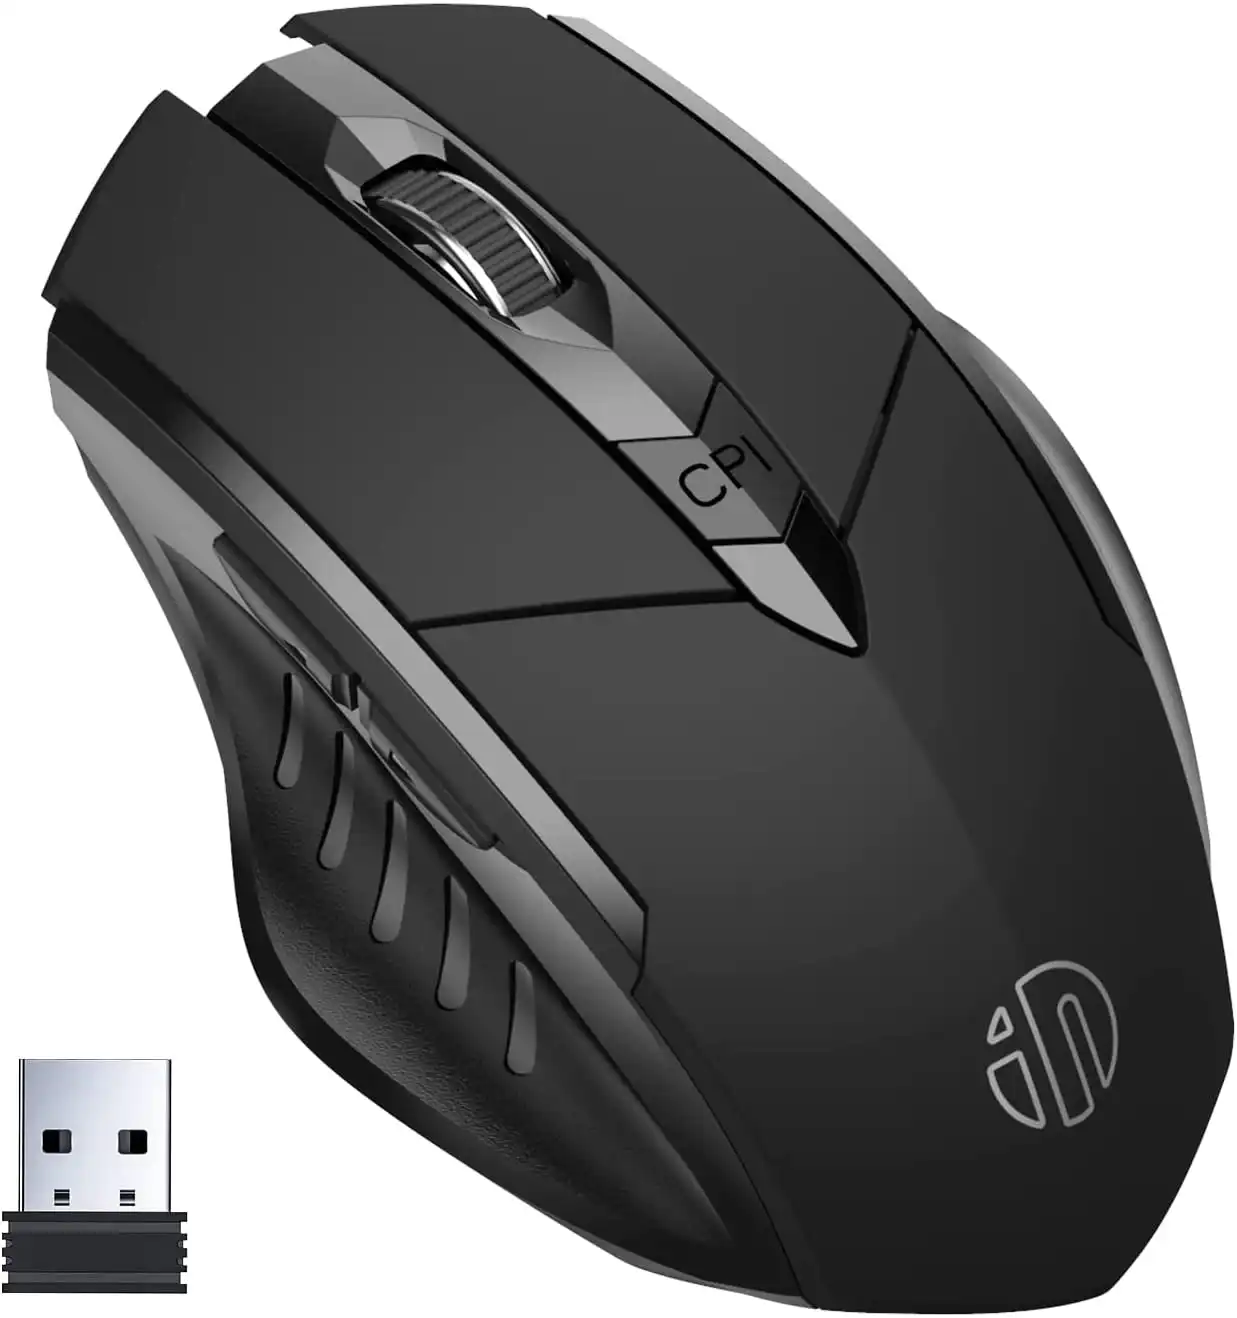 INPHIC Wireless Mouse 700Mah Large Ergonomic Rechargeable 2.4G Optical PC Laptop Cordless Mice with USB Nano Receiver, for Windows Computer Office, Black